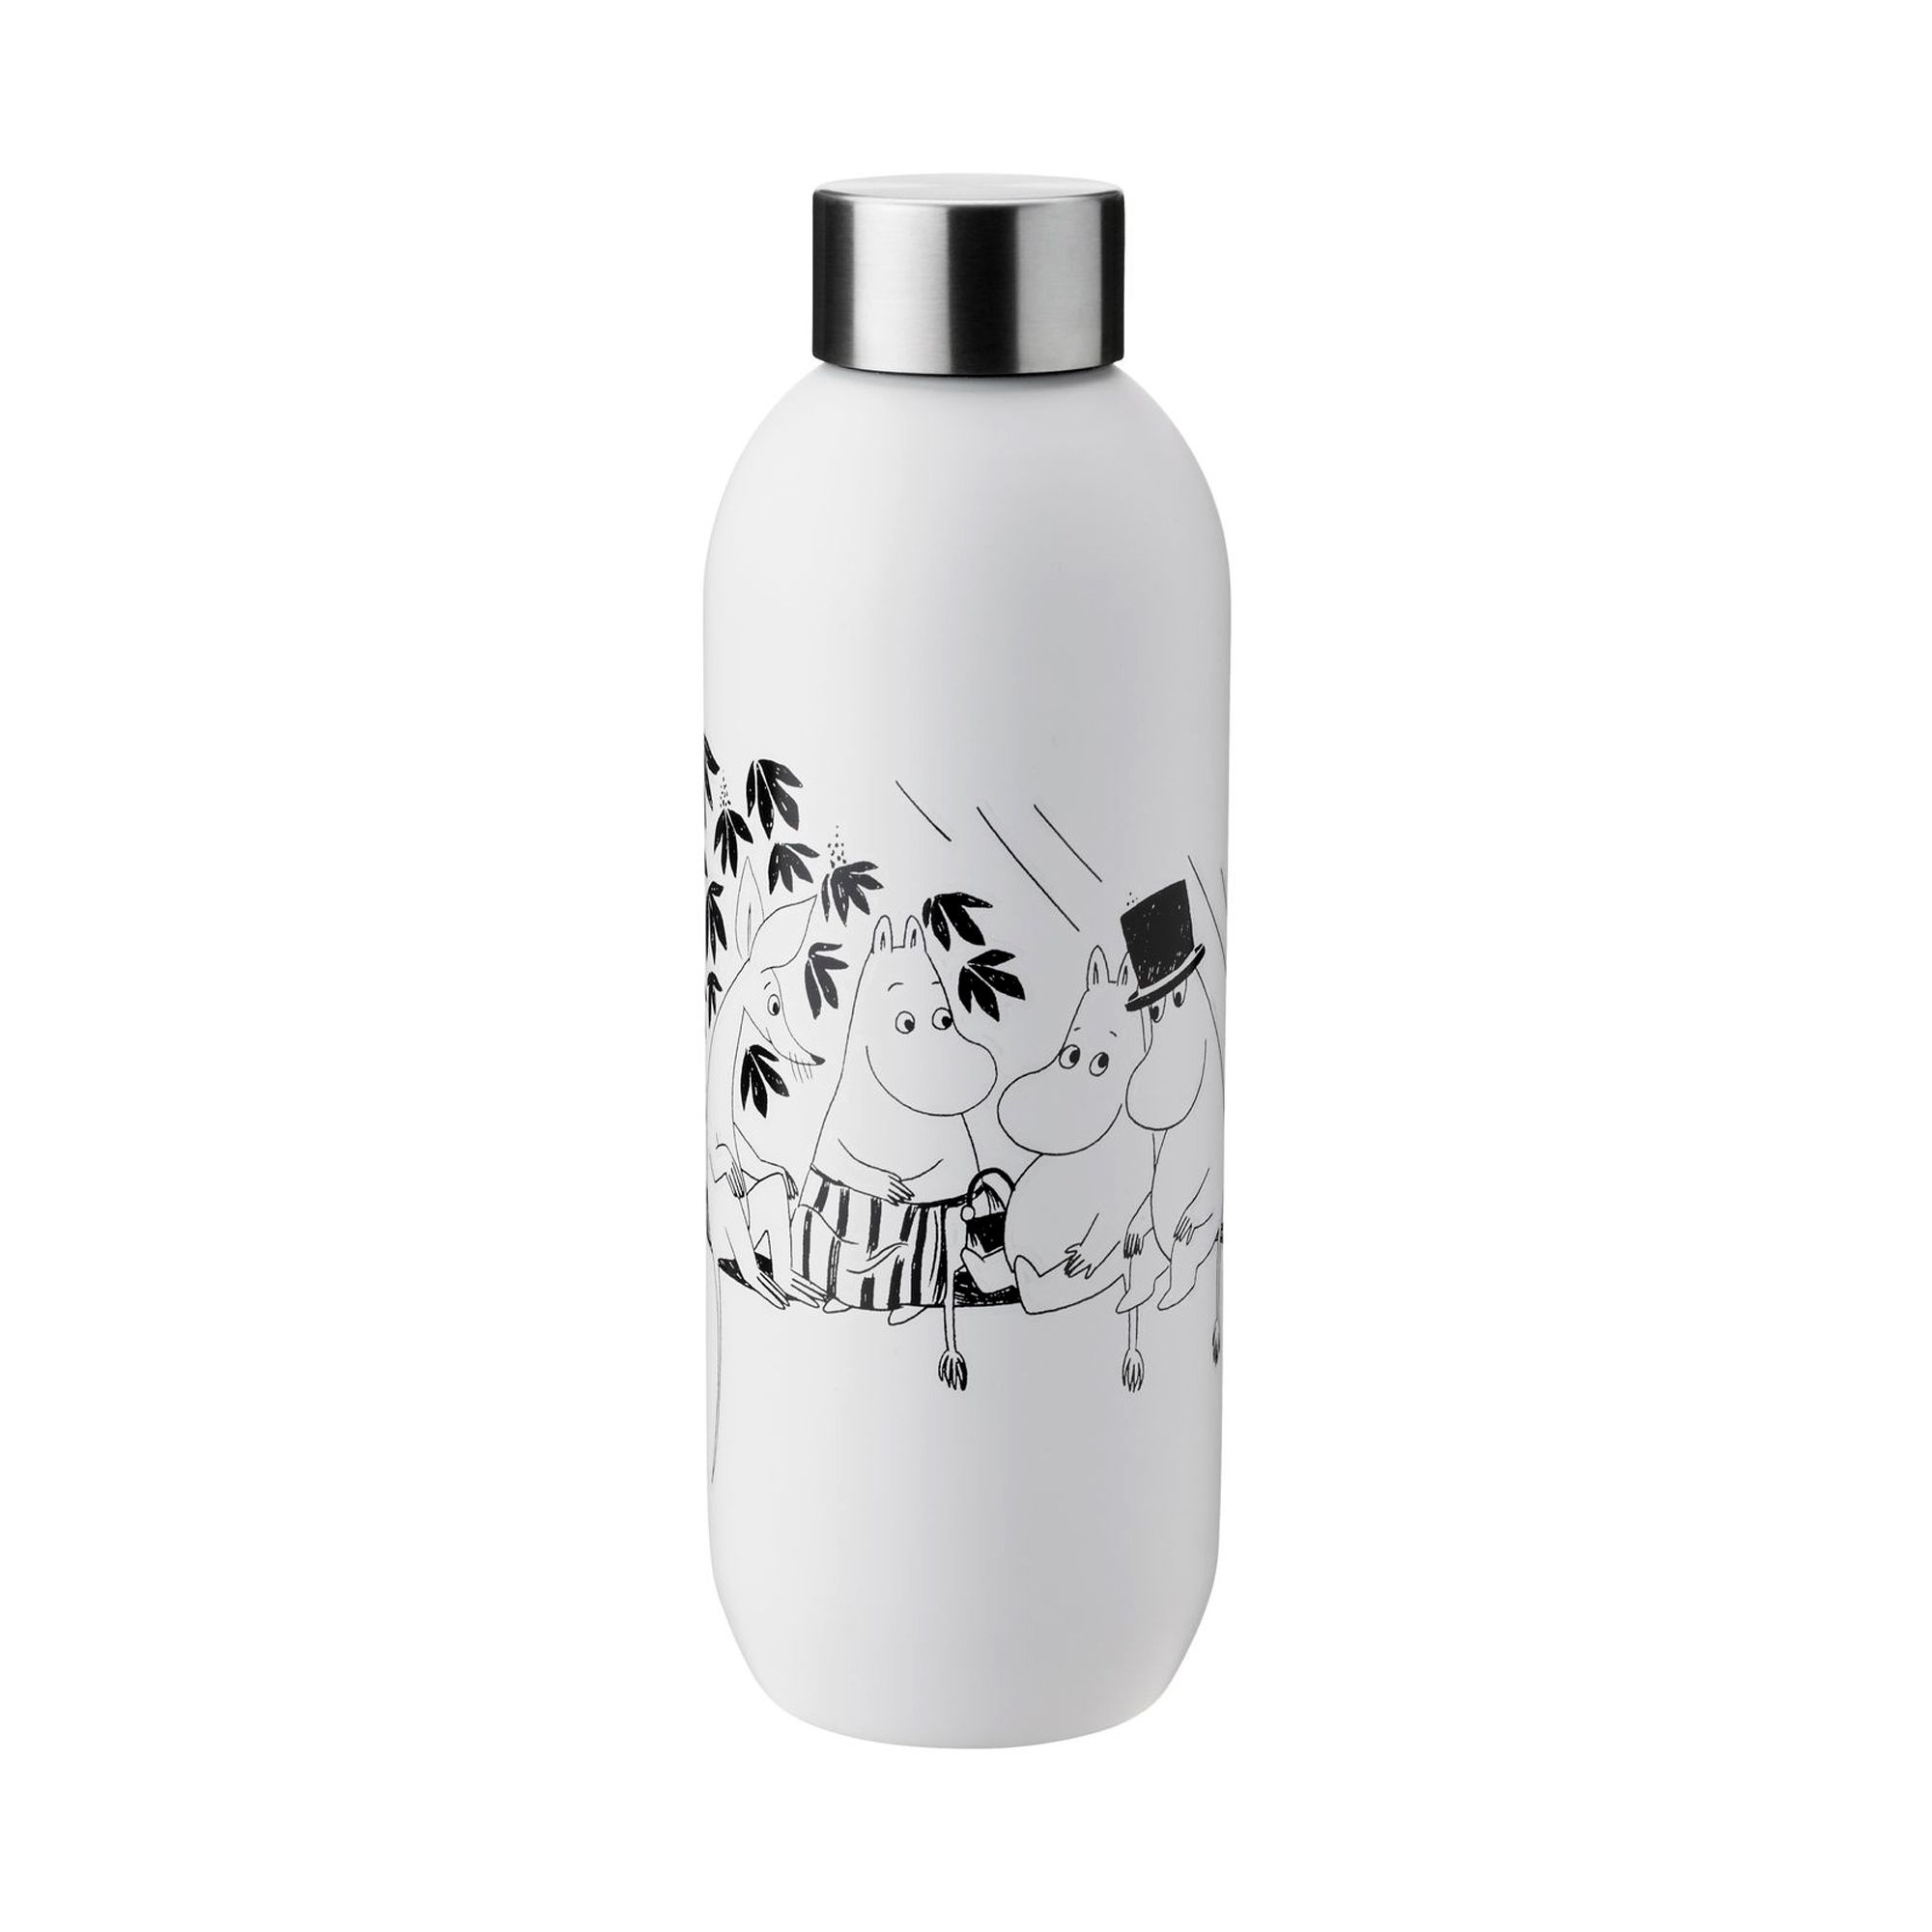 Stelton x Moomin - 0.75 L - Keep Cool Thermoflasche - Soft White